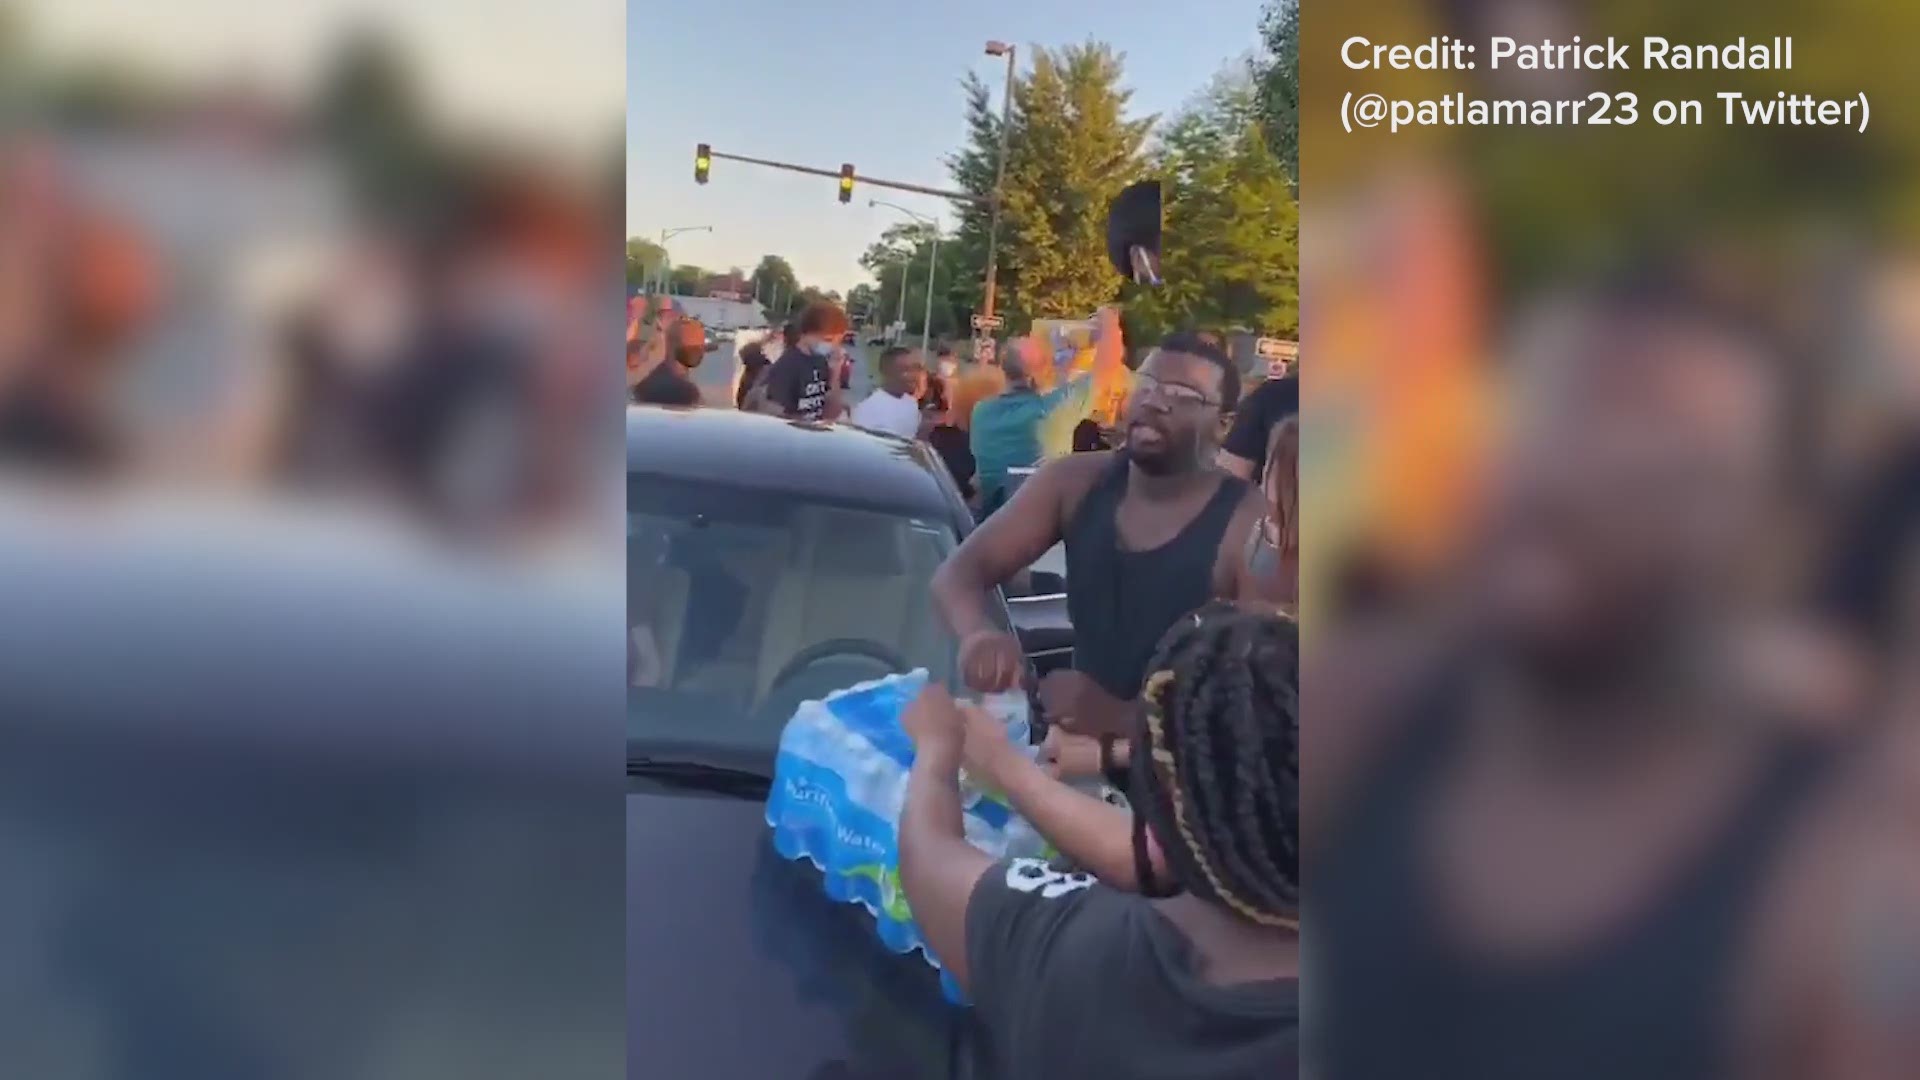 A white couple brought food and water to a group protesting in Little Rock, Arkansas.